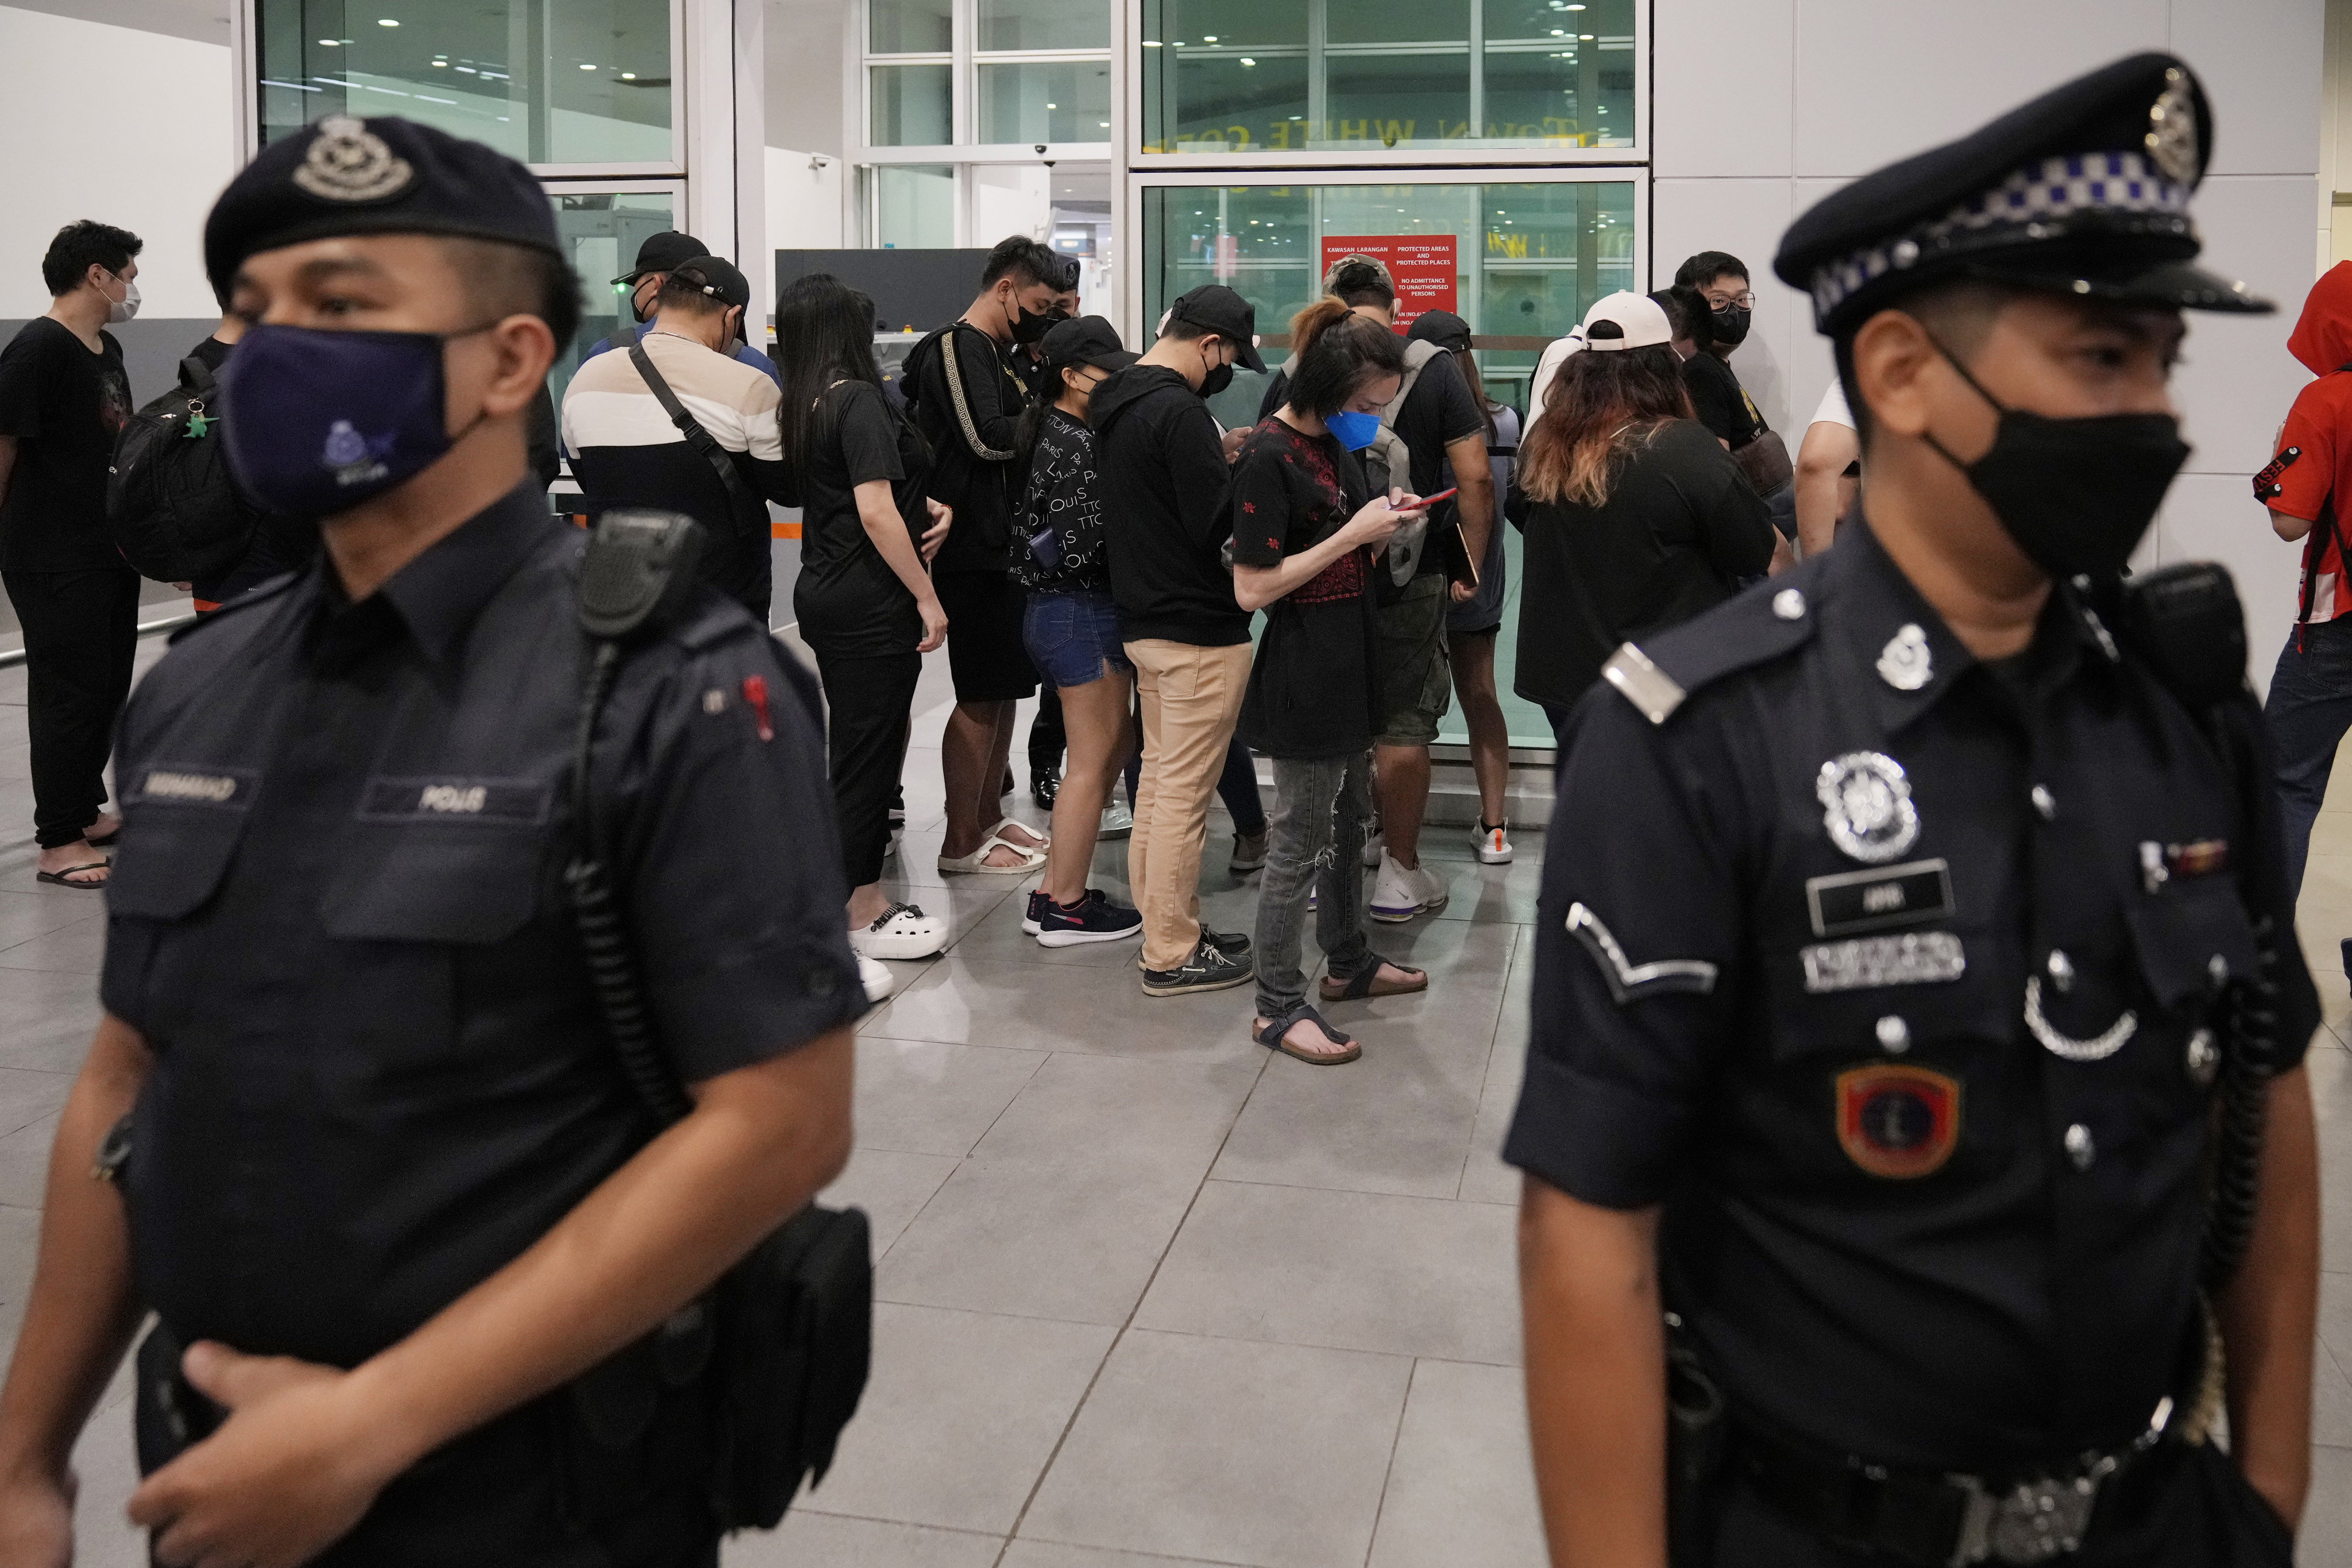 Malaysian youths arrive at Kuala Lumpur airport in September after being rescued from traffickers in Cambodia. Photo: AP